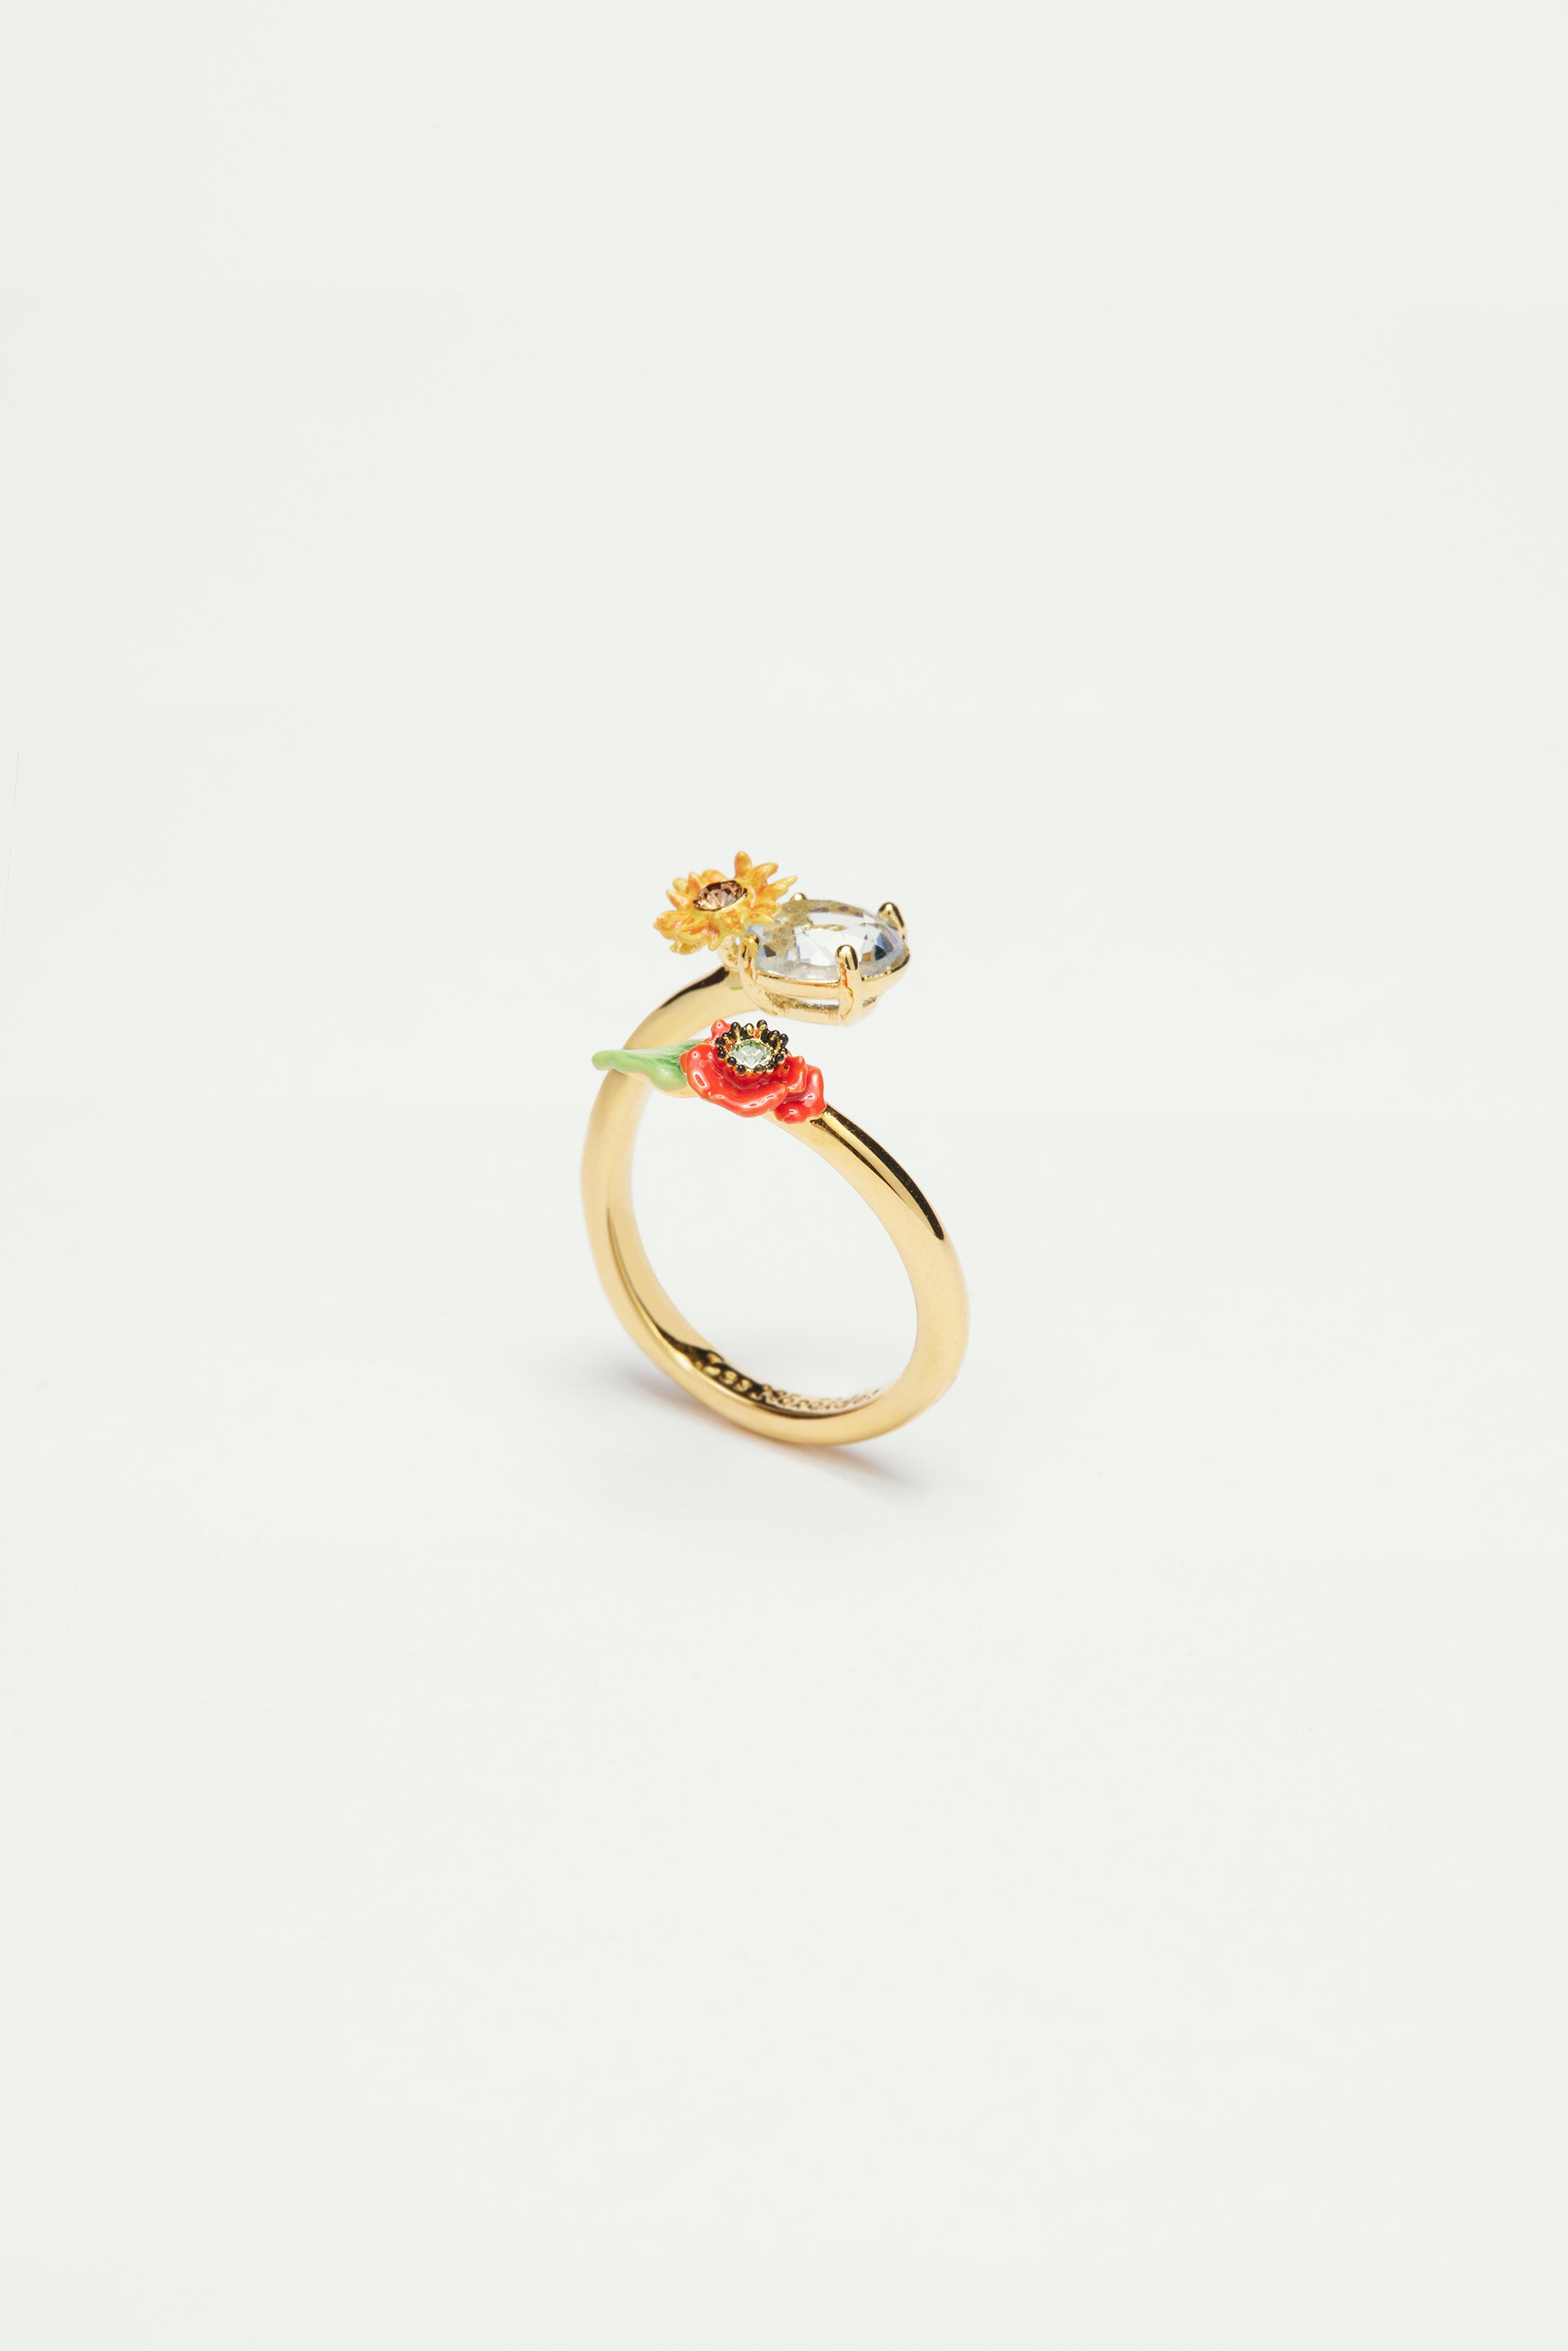 Wildflower and round stone adjustable ring